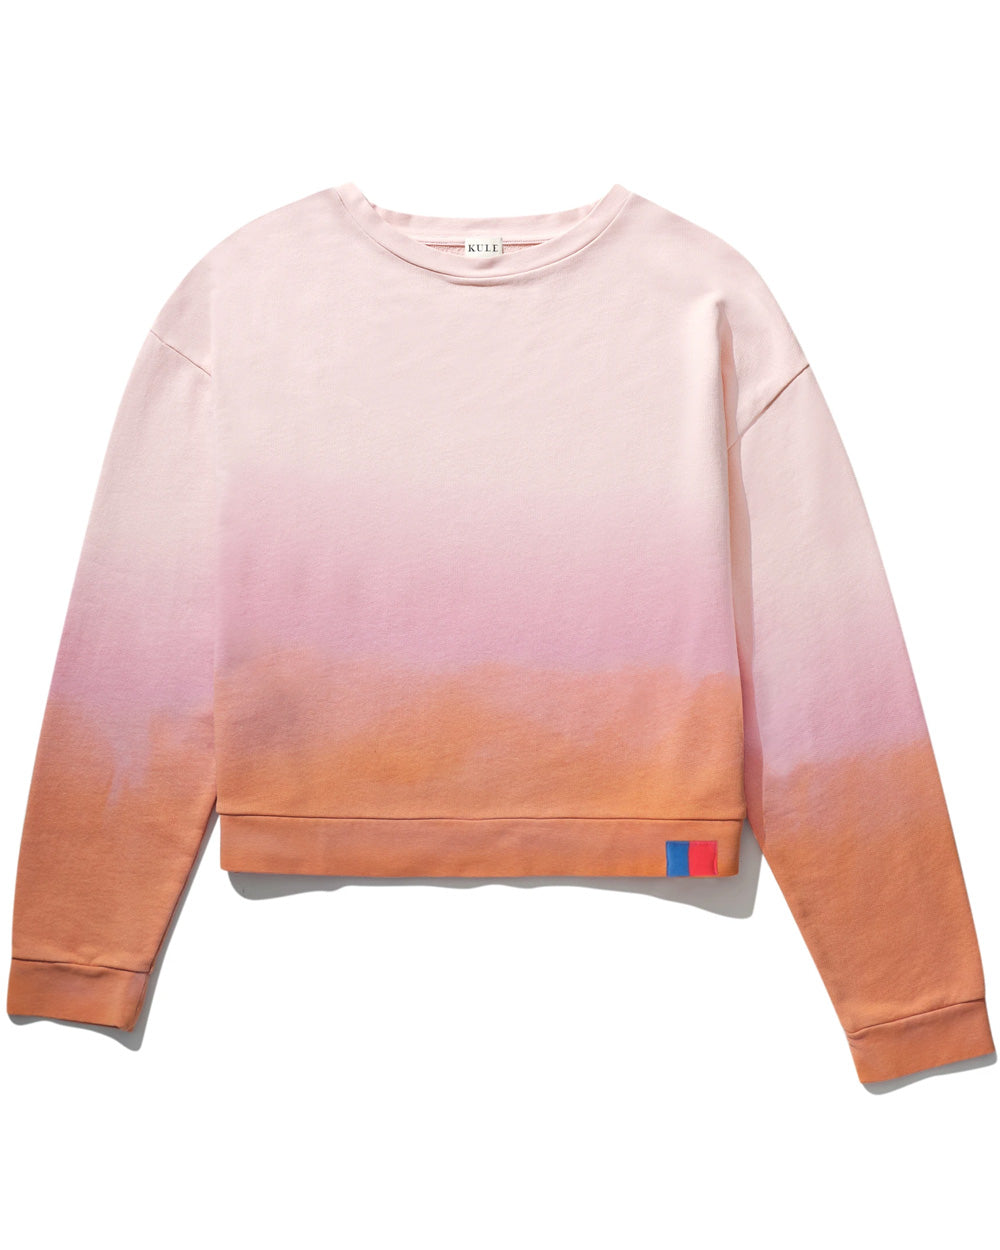 The Summer Pullover in Pink Ombre Dip Dye